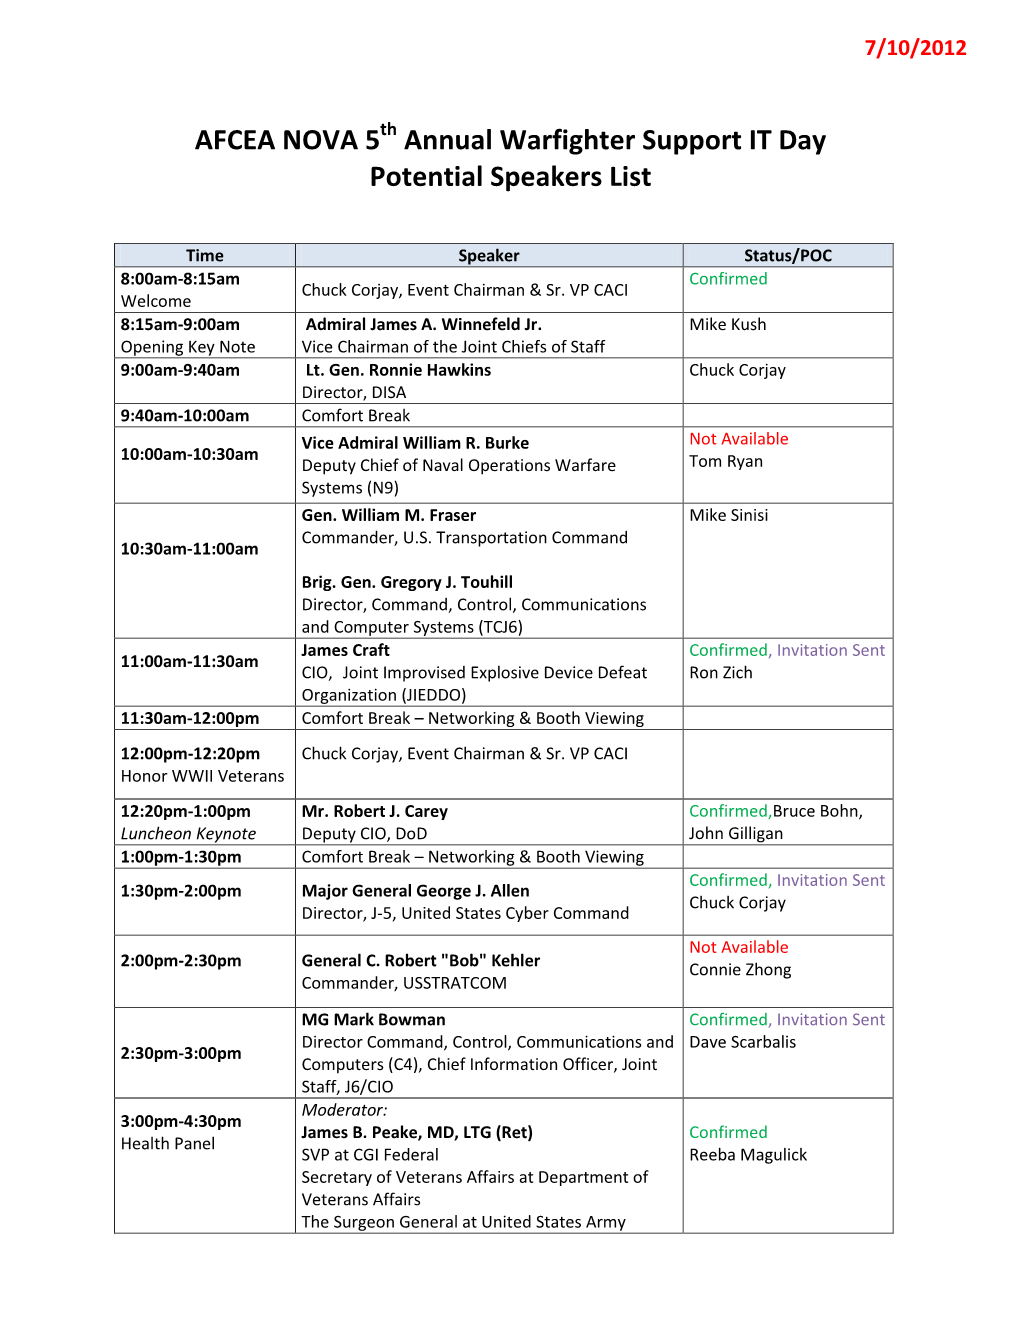 AFCEA NOVA 5Th Annual Warfighter Support IT Day Potential Speakers List